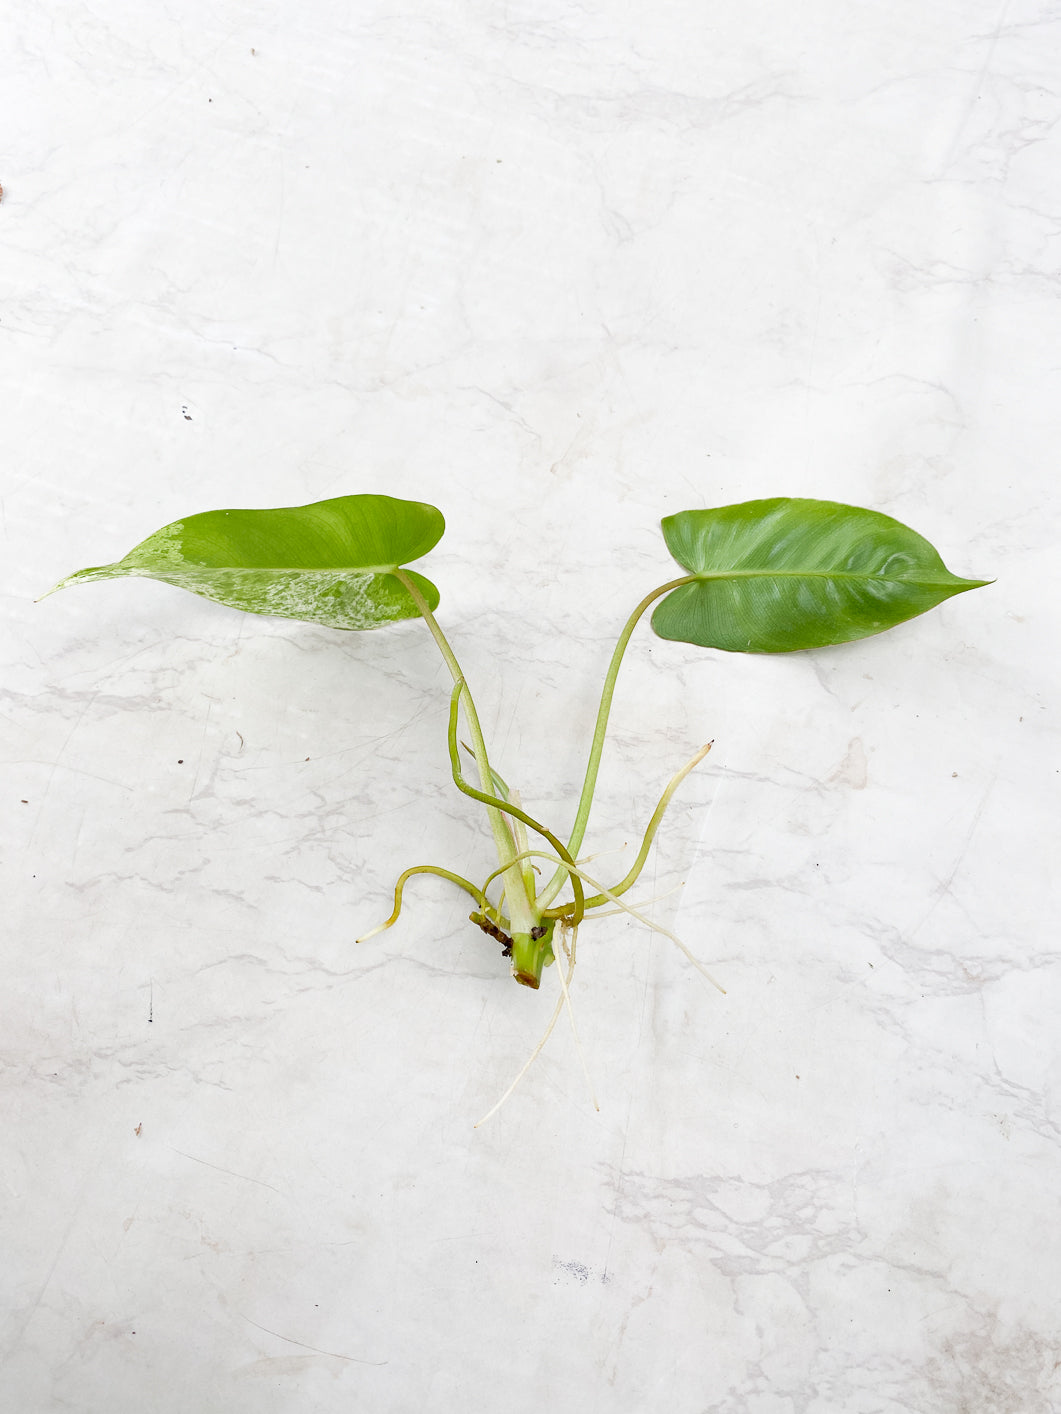 Philodendron Burle Marx Mint 2 leaves 1 sprout rooting